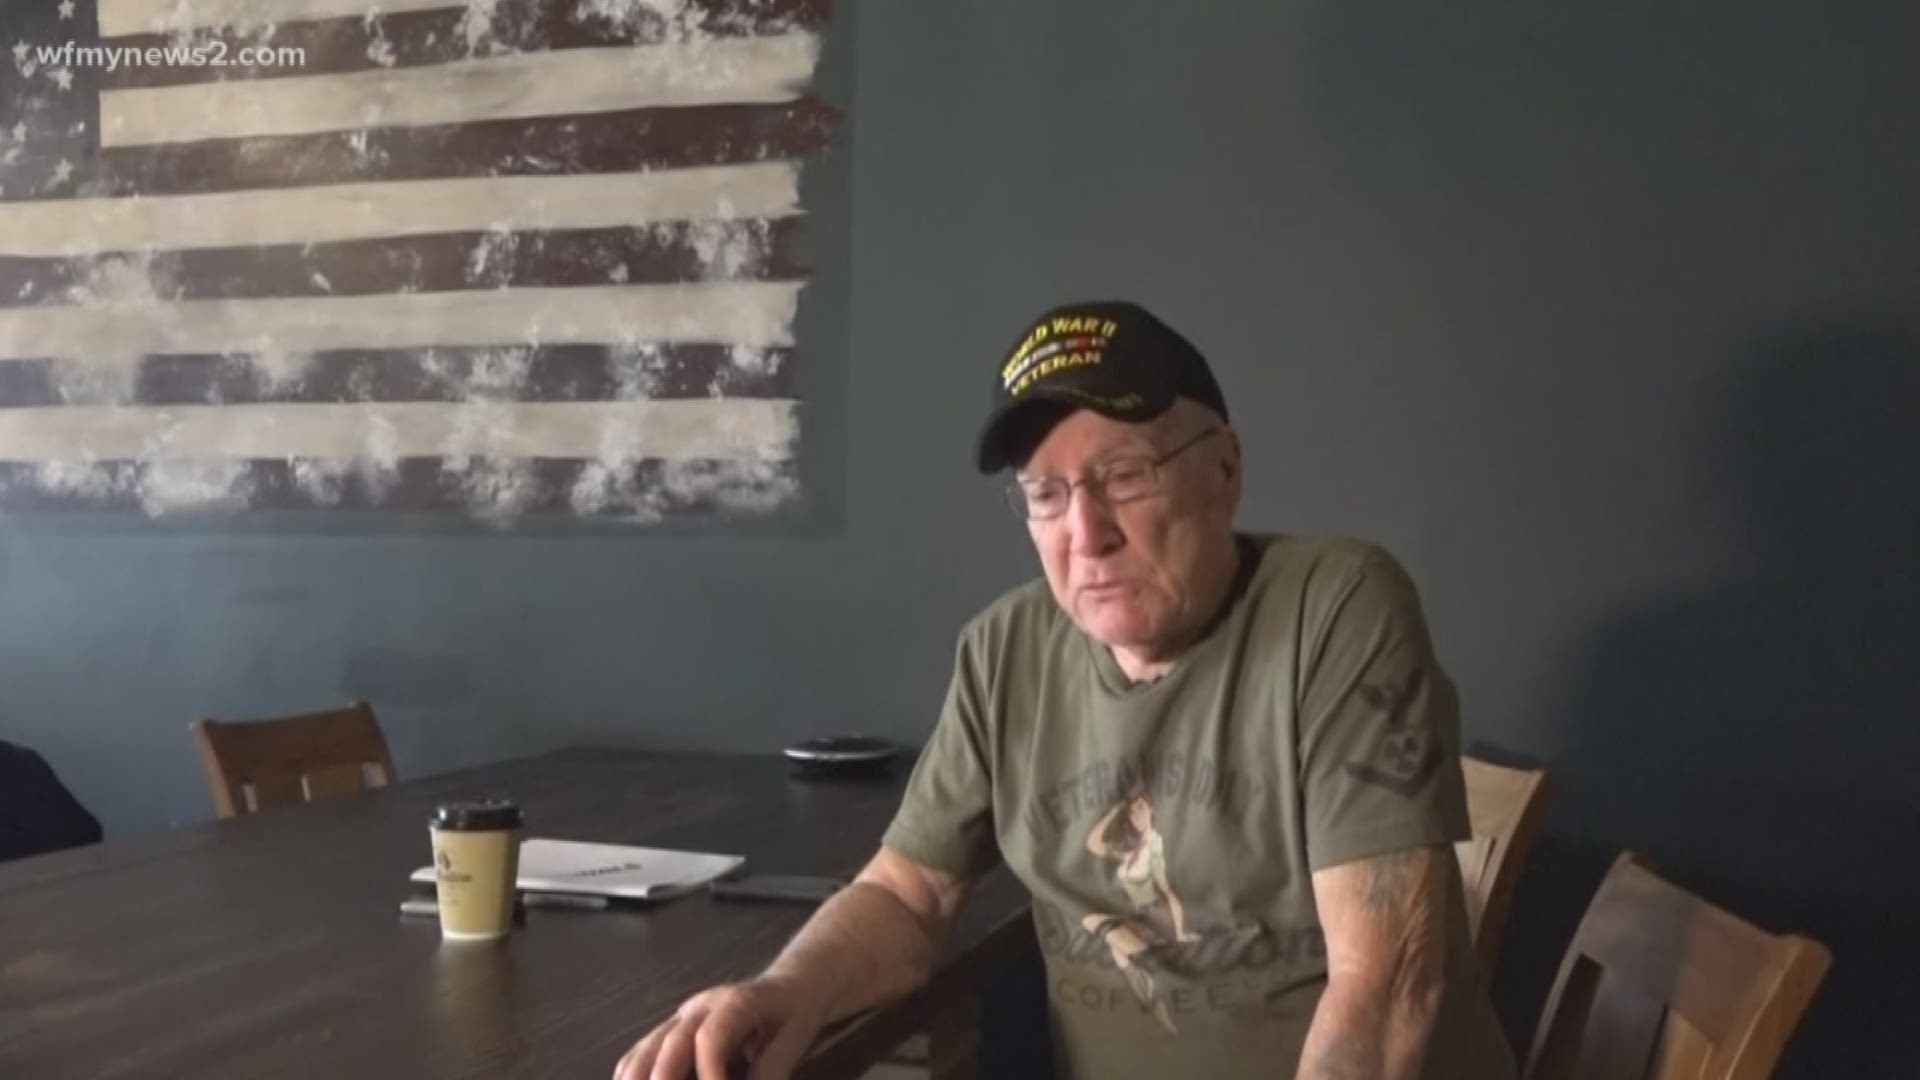 94-year-old WWII Veteran, Bob Sargent, is a legend in many ways. He now spends his days telling war stories and signing autographs while working as a Barista.